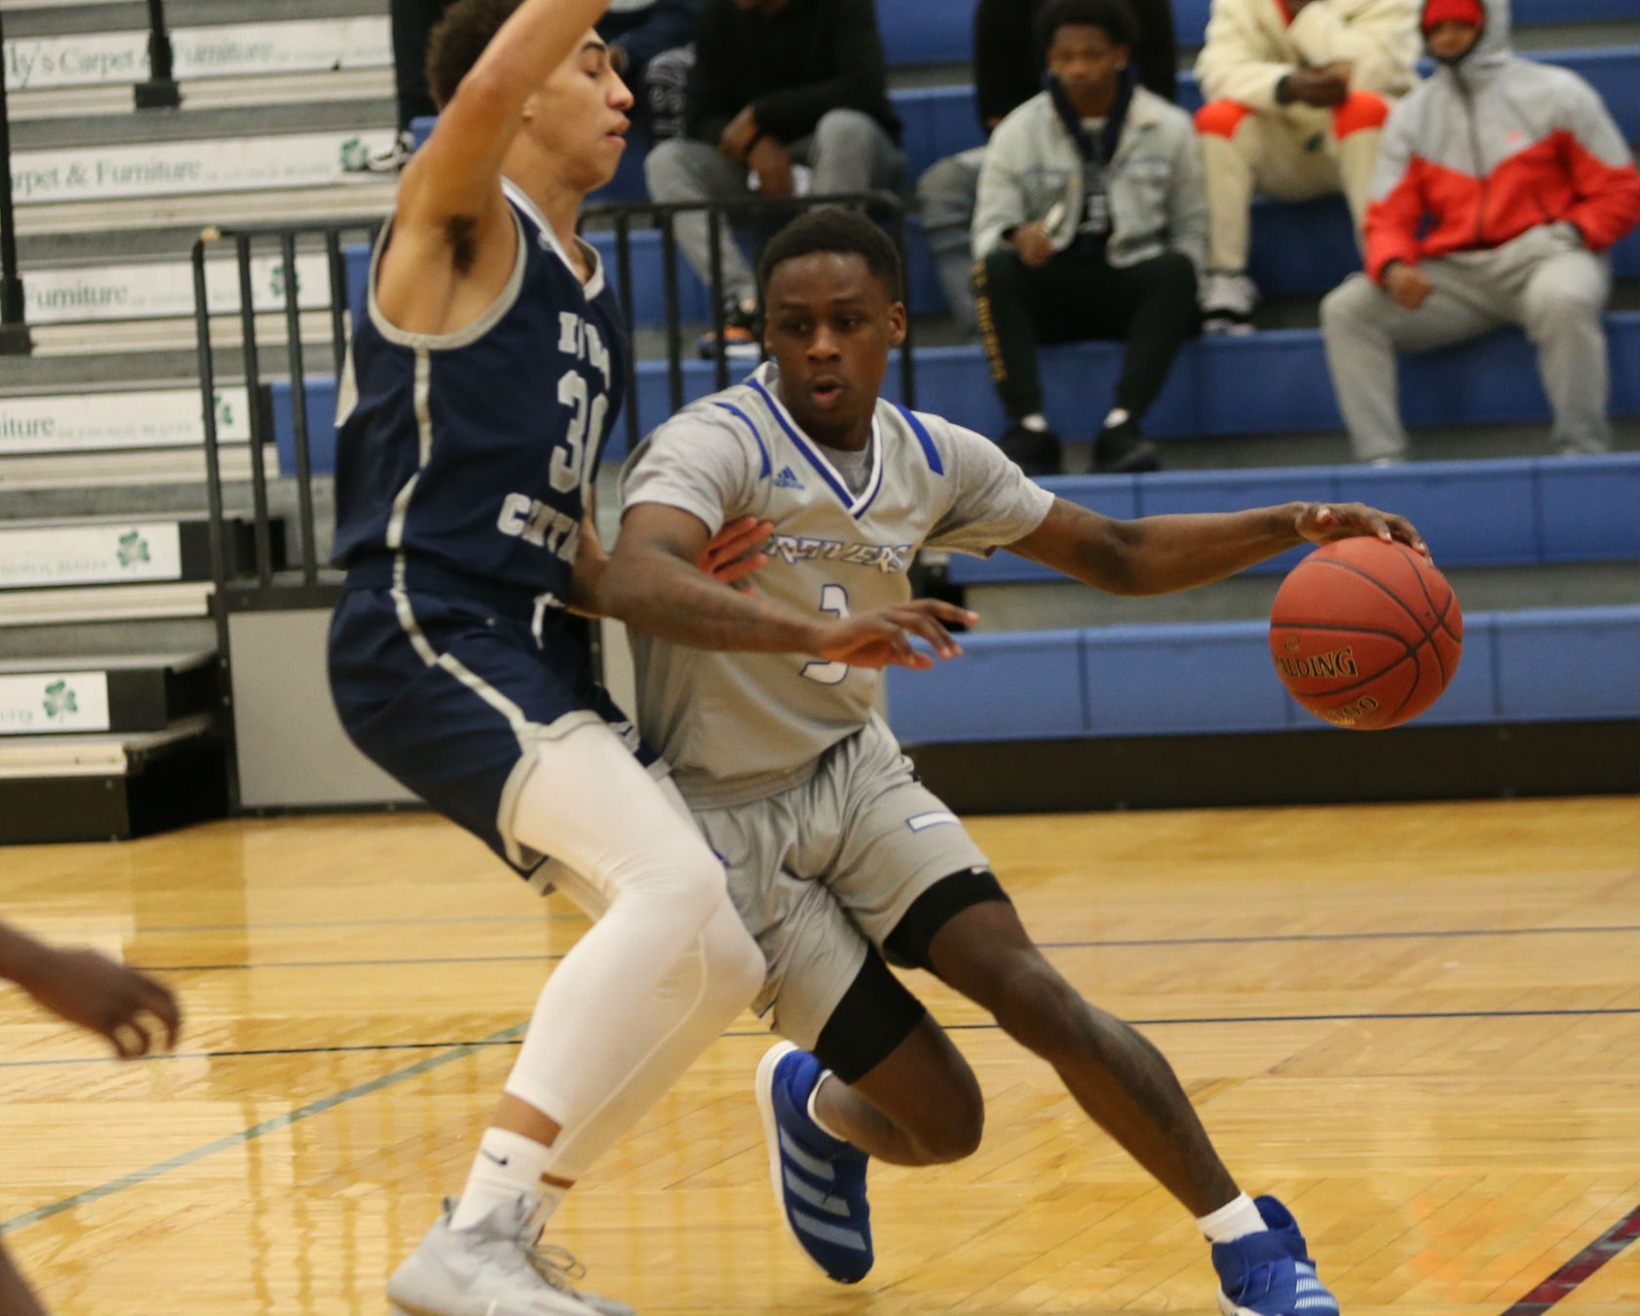 Kaleb Thornton along with his Reiver teammates fell a few possessions short of sweeping the Butler Grizzlies Tuesday (11/19) evening in El Dorado Kansas.